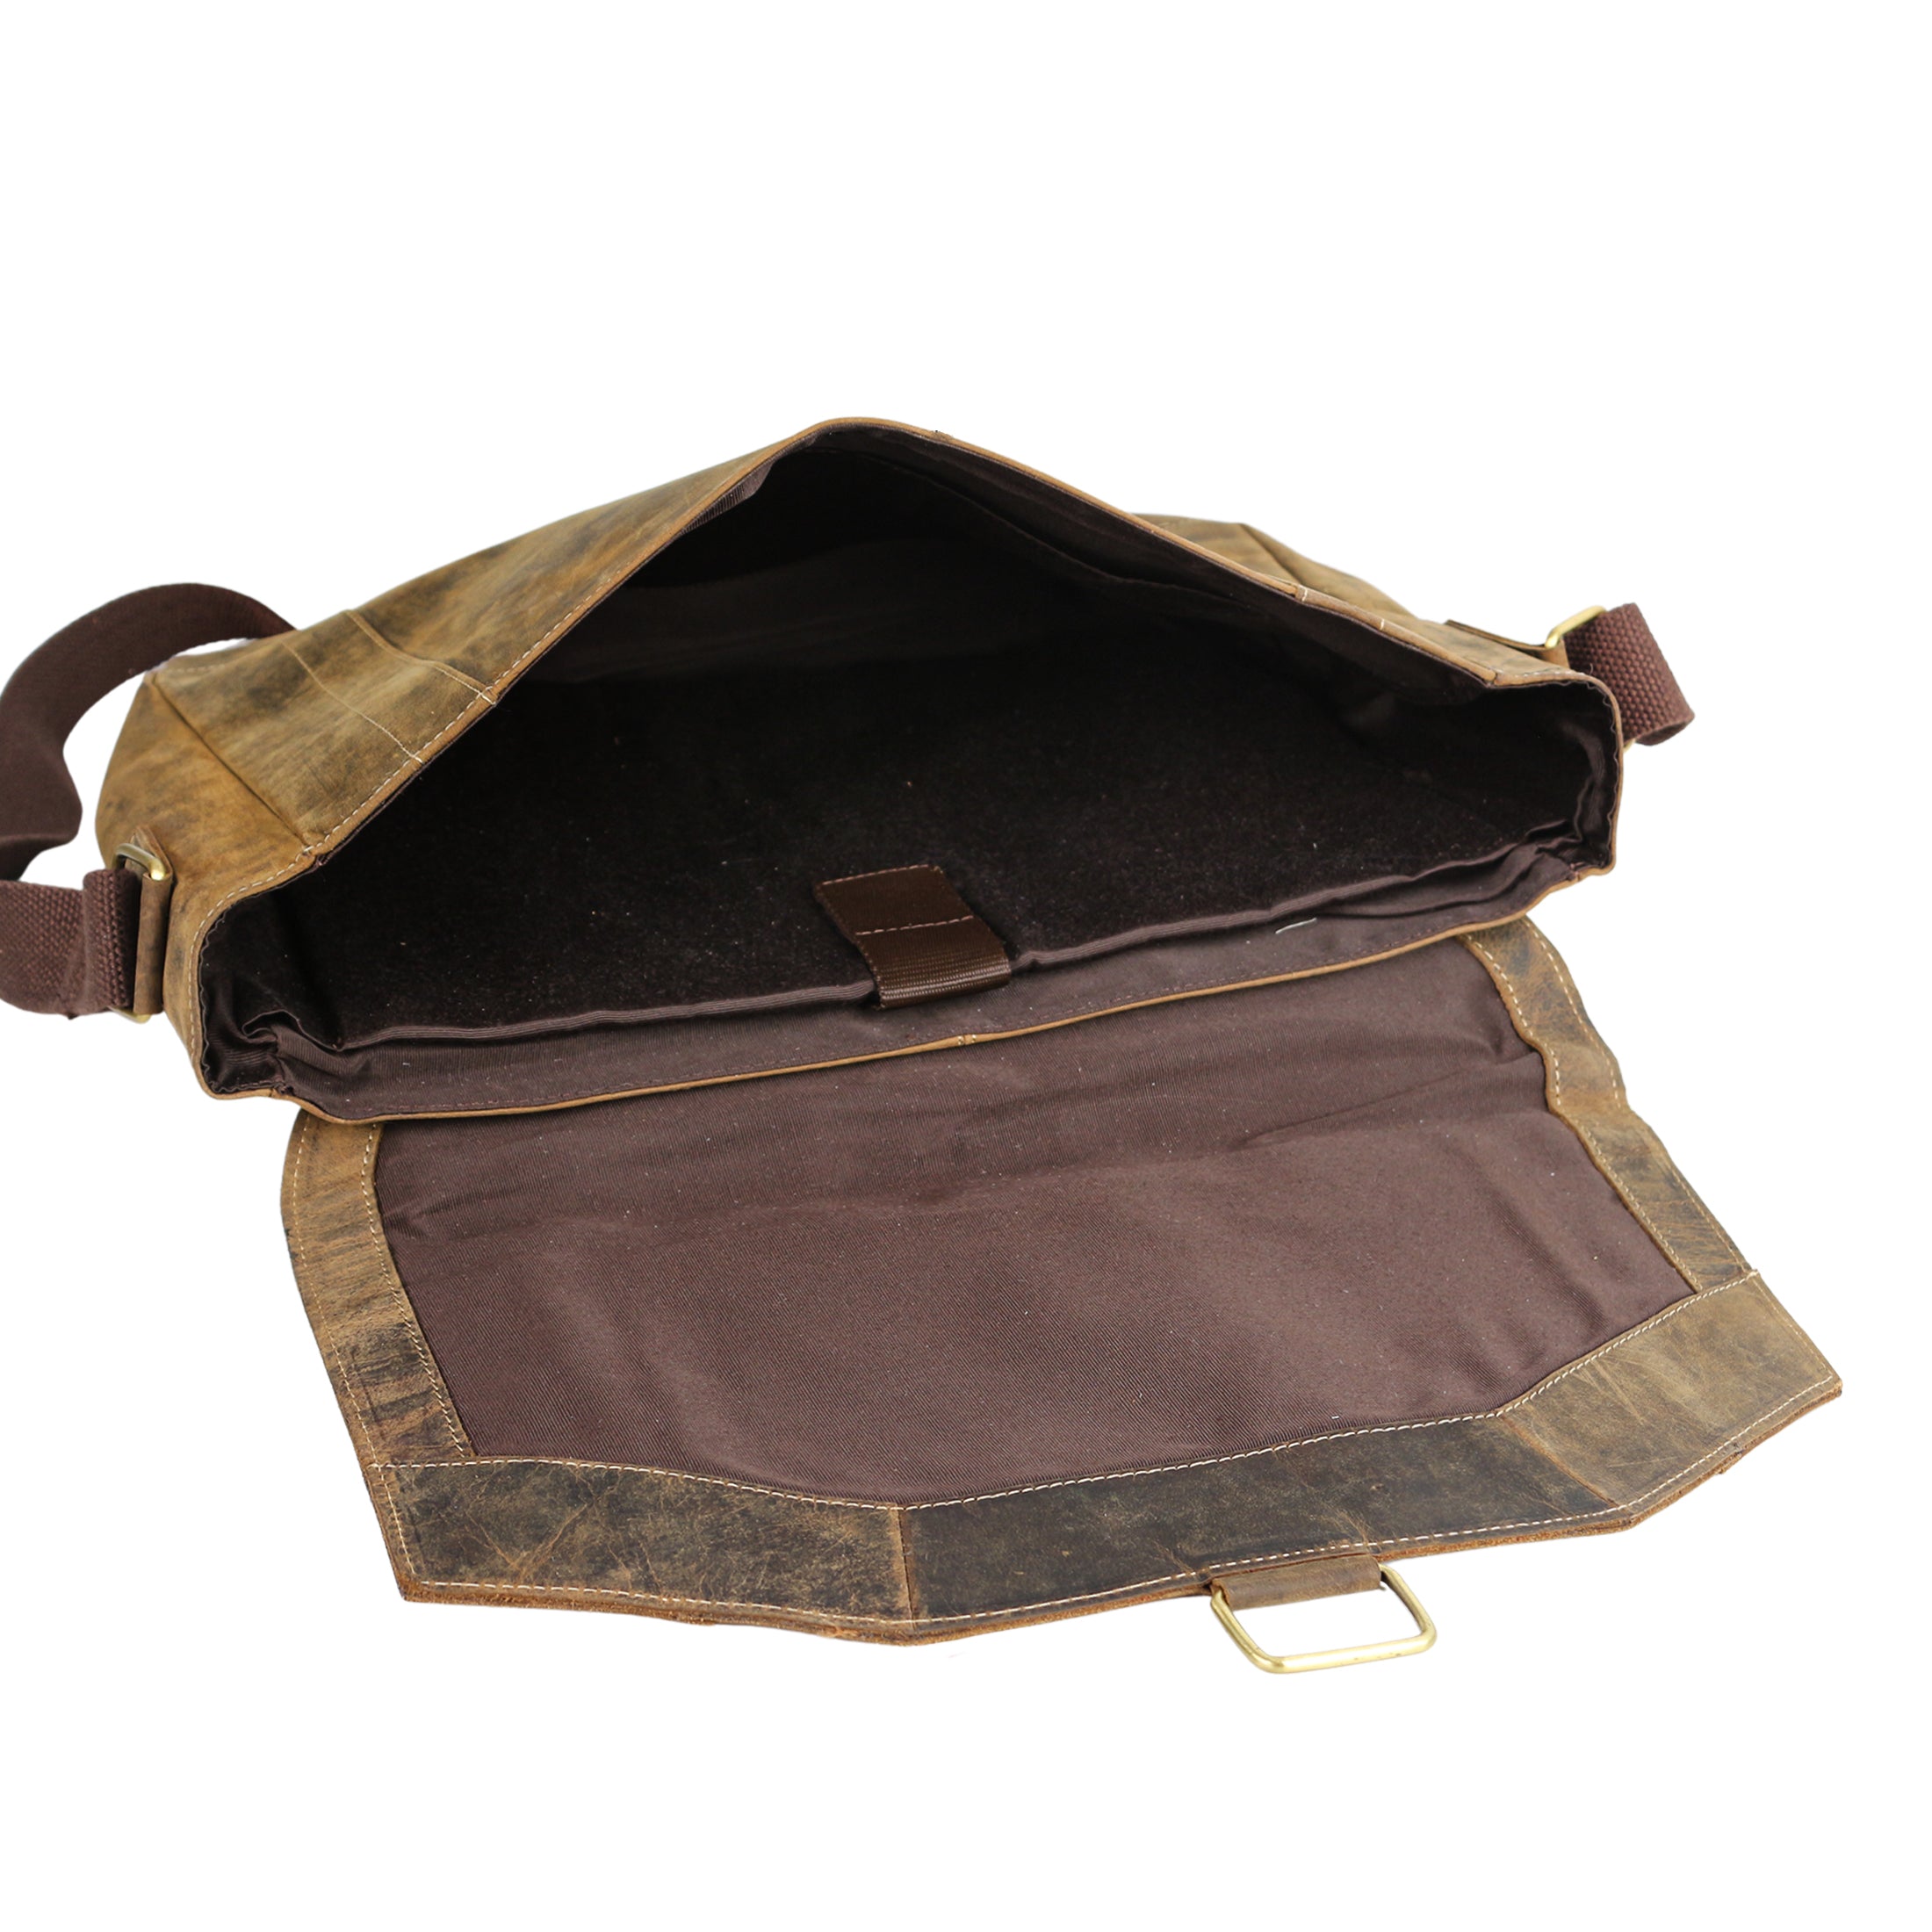 Vintage-Style Tan Canvas & Leather Messenger Bag, In stock!